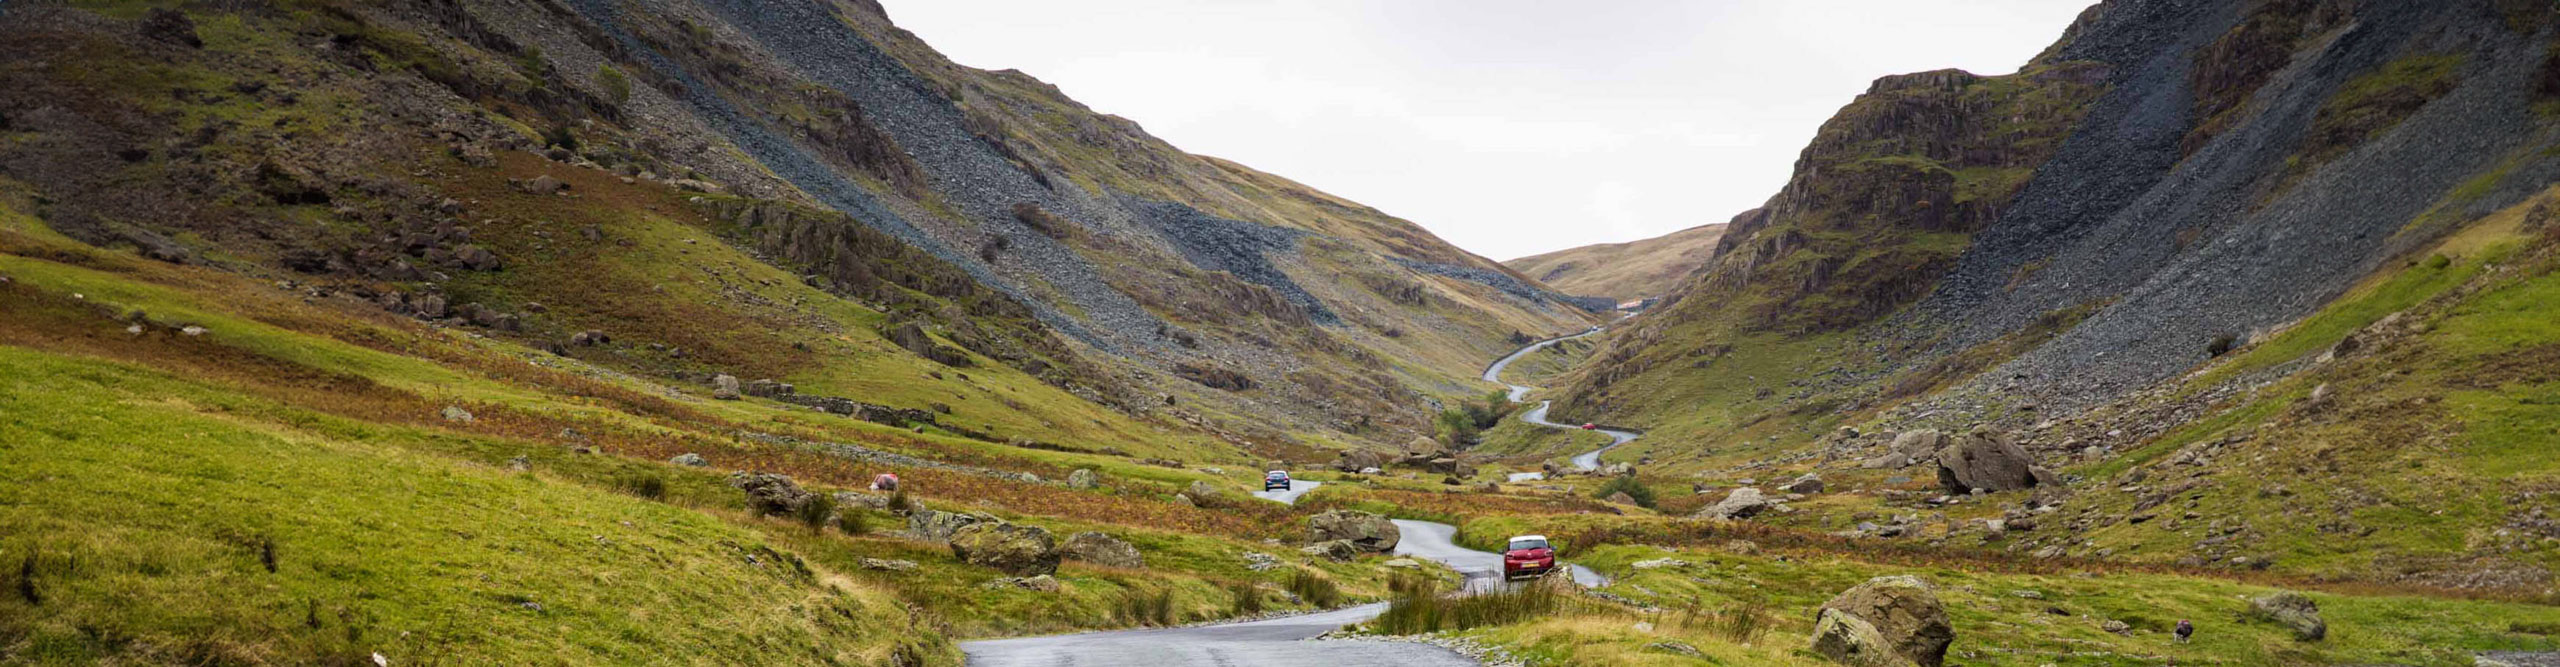 Car driving on road through between foothills of the Lake District, England 